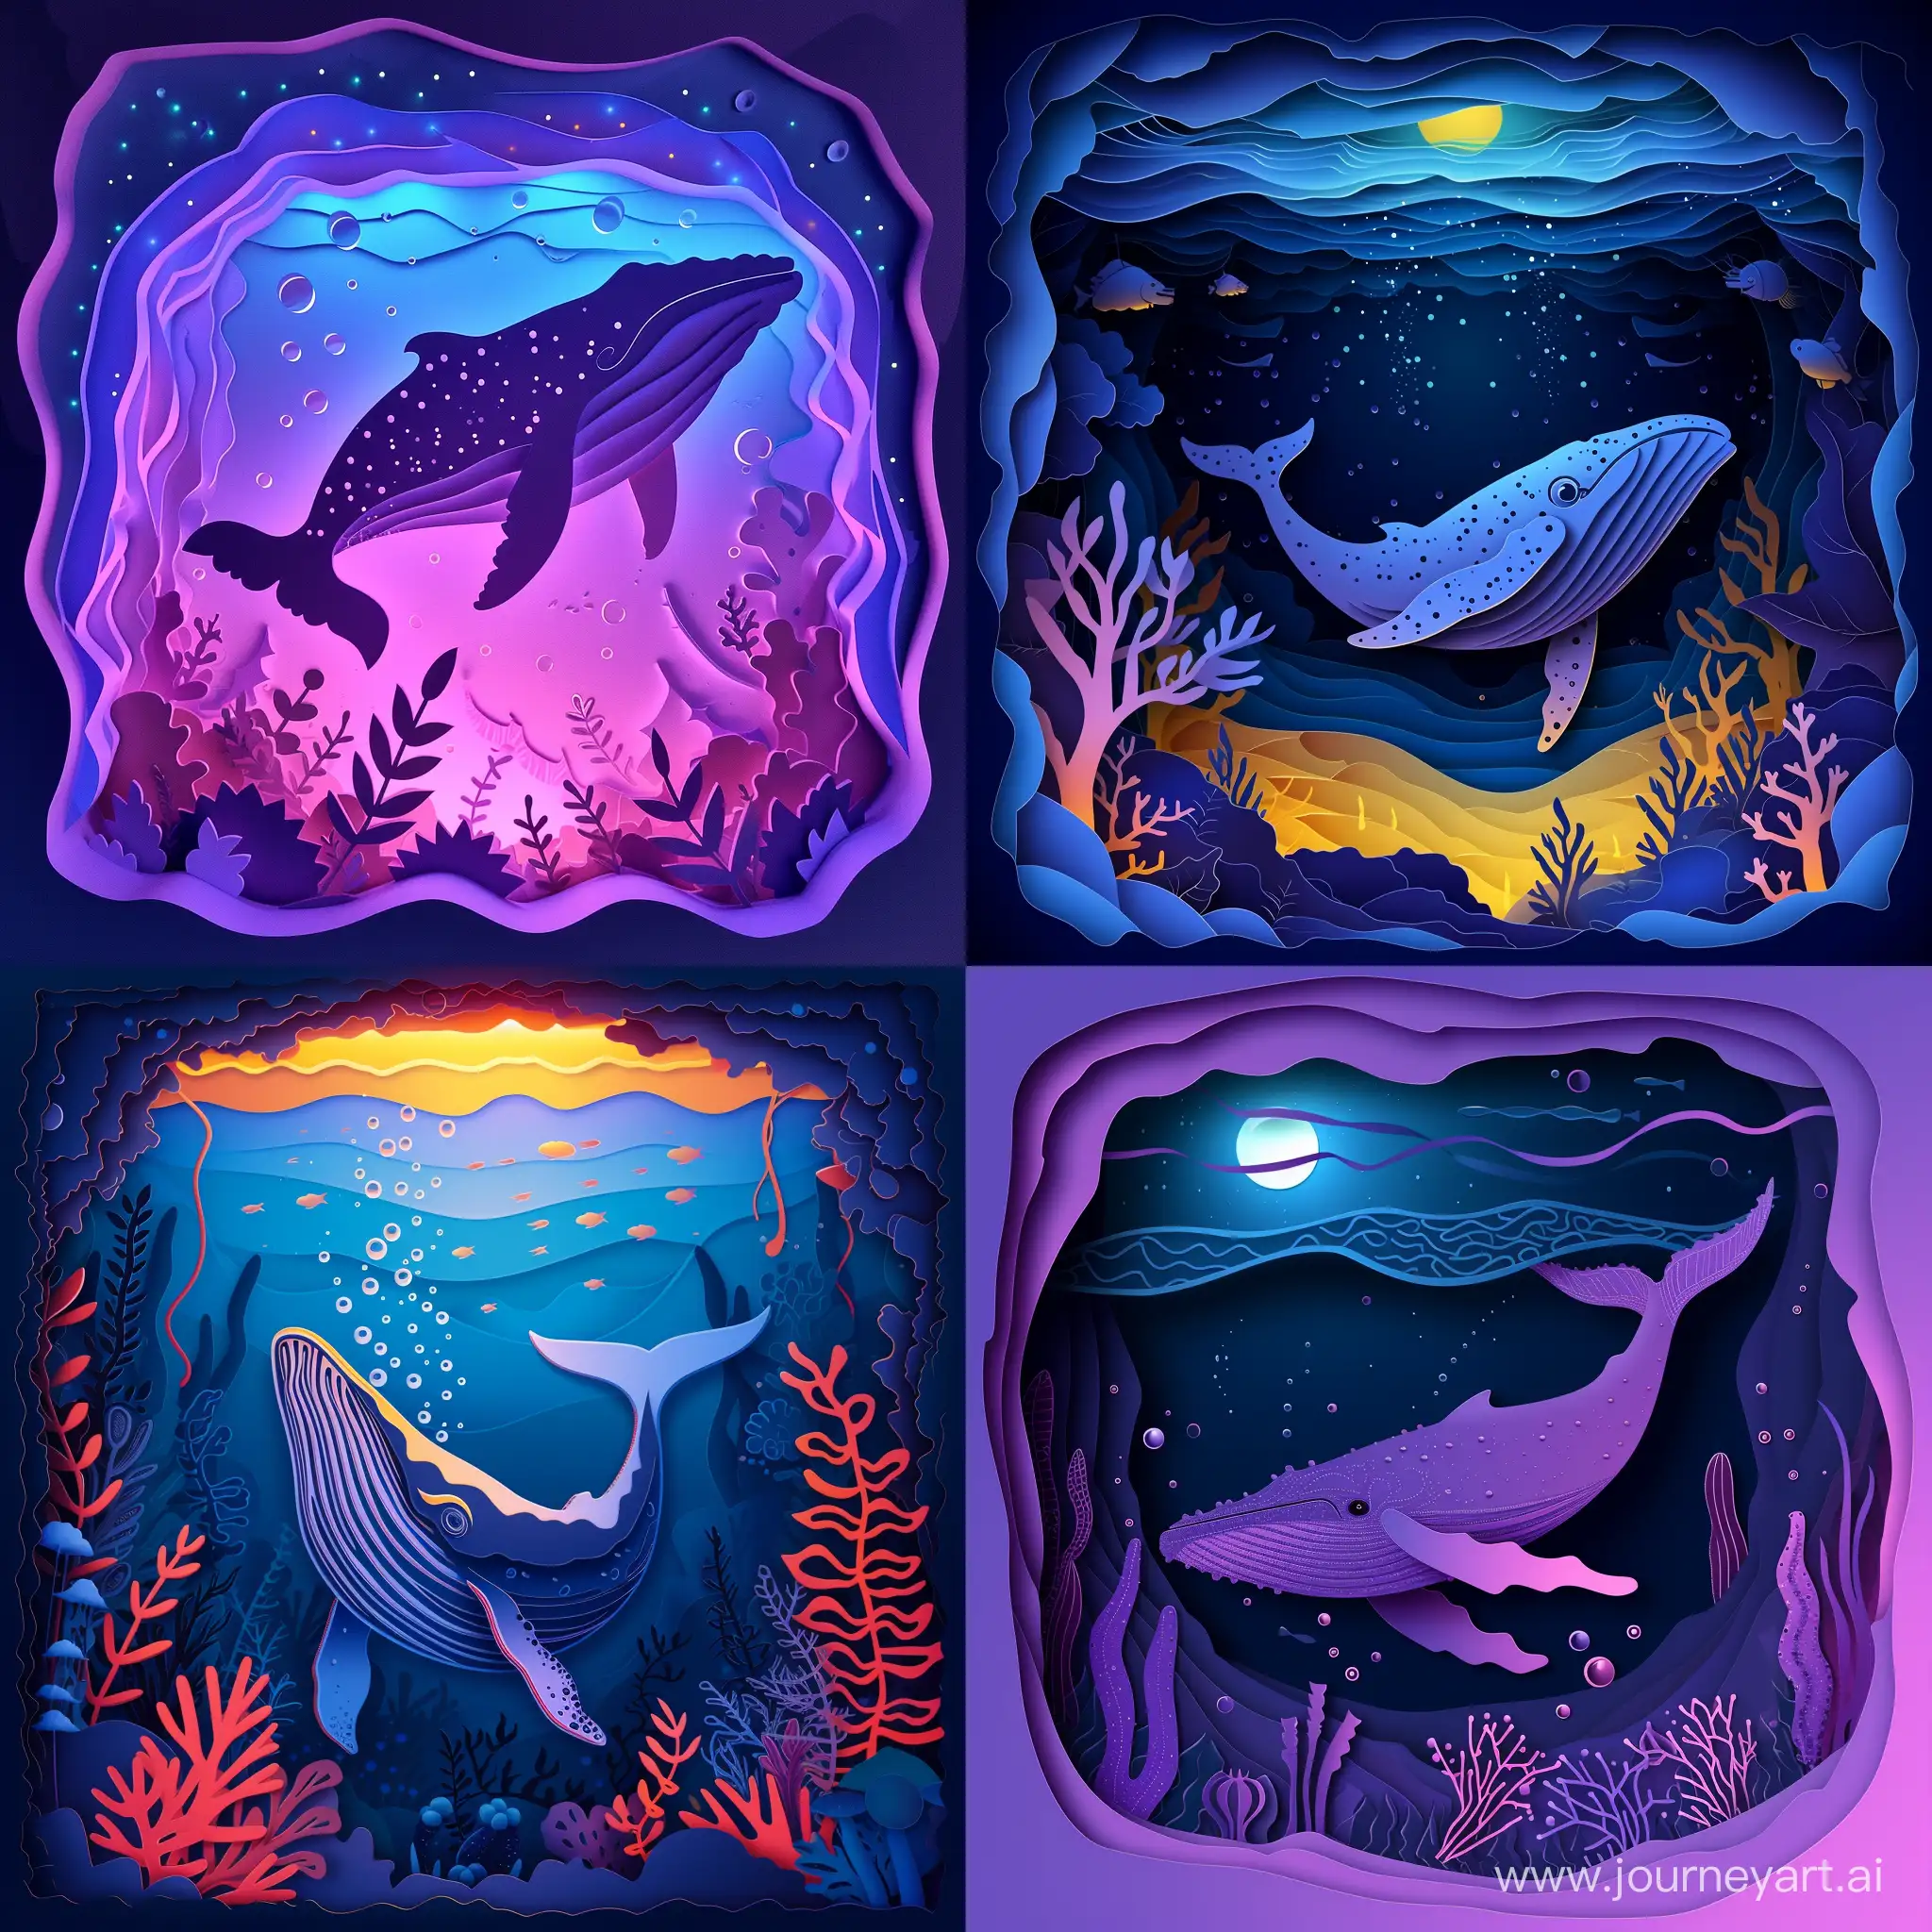 cut paper art of under the water in vector style with whale, neon colors, high quality details